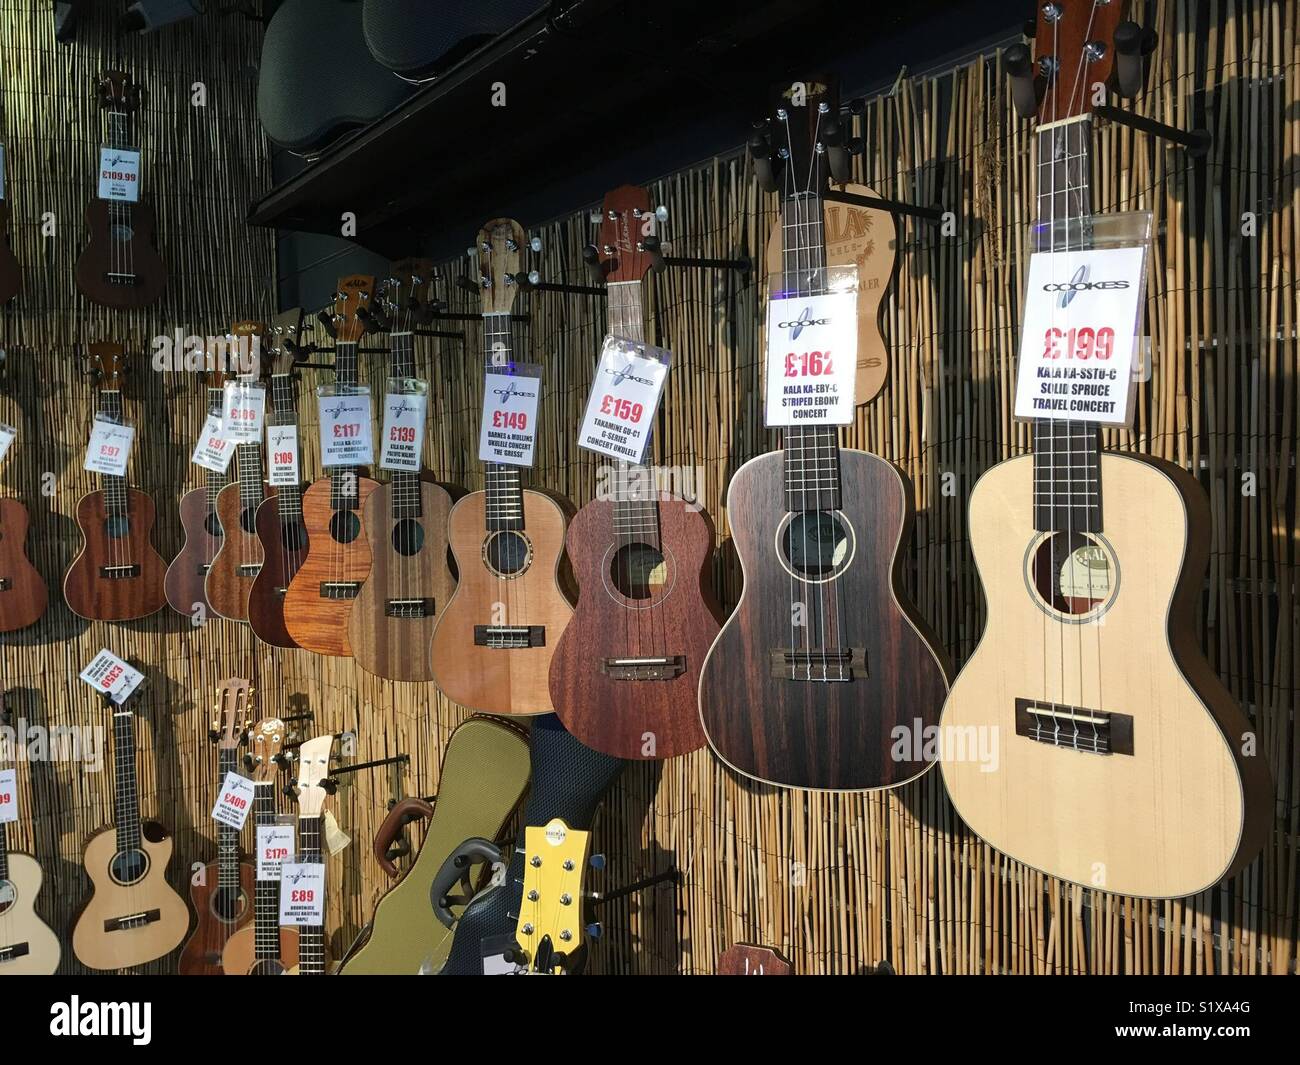 Guitars on display with price tags, music shop in Norwich, Norfolk, uk Stock Photo